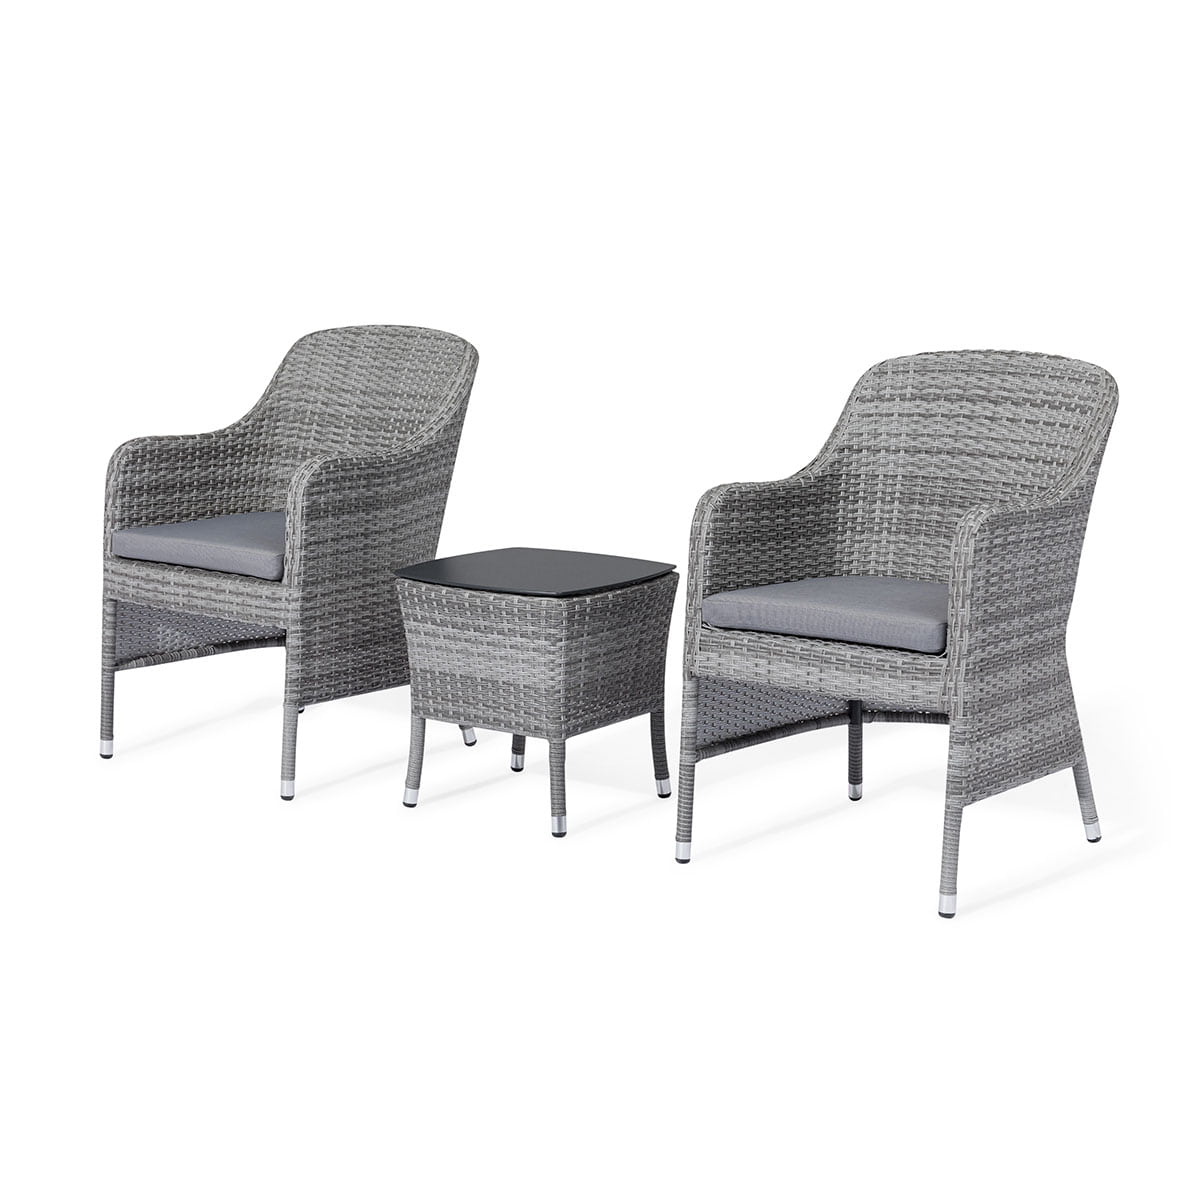 Grey rattan bistro set with small table